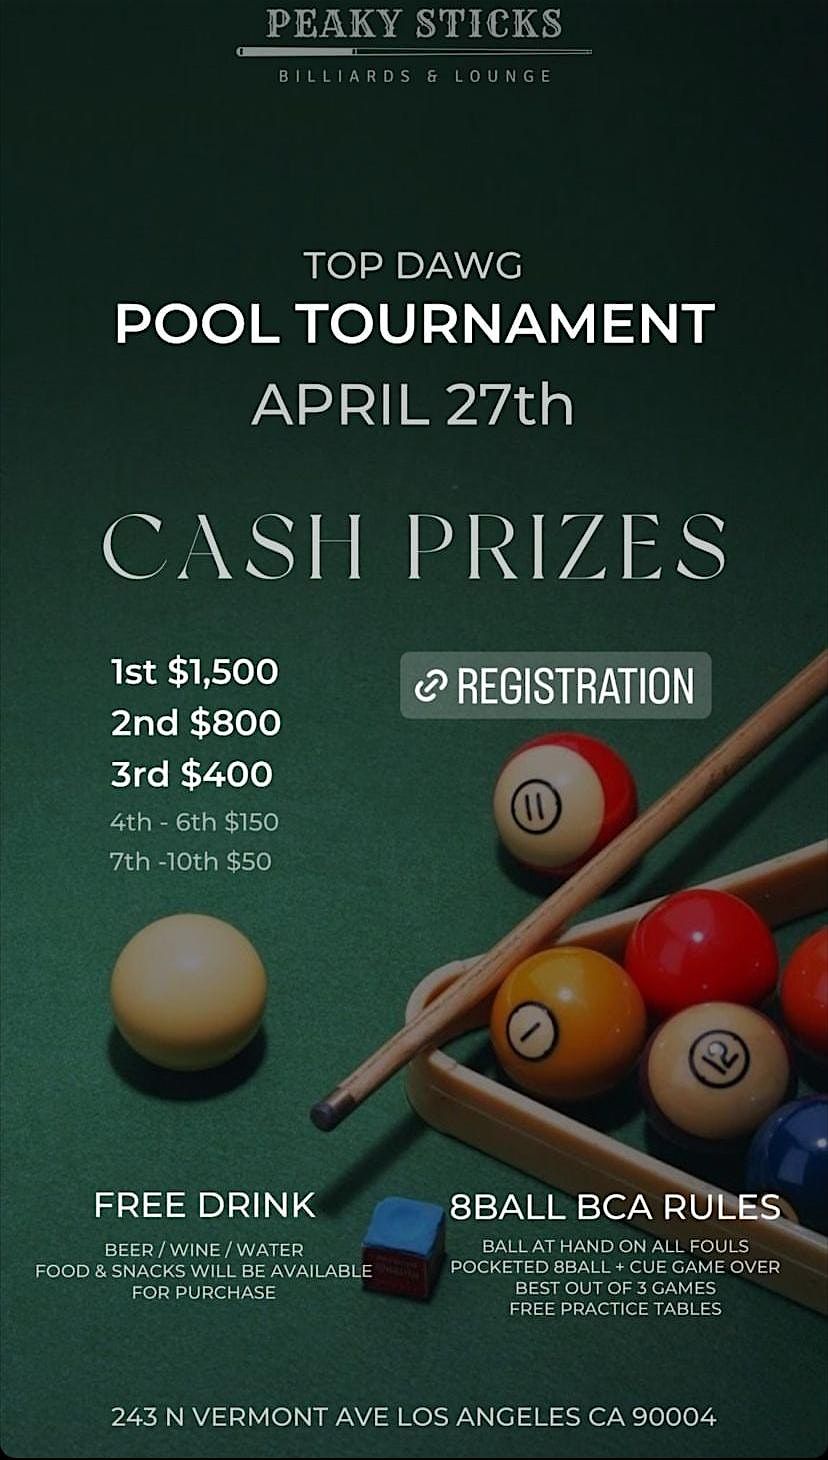 TOP DAWG POOL TOURNAMENT PRESENTED BY PEAKY STICKS BILLIARDS AND LOUNGE